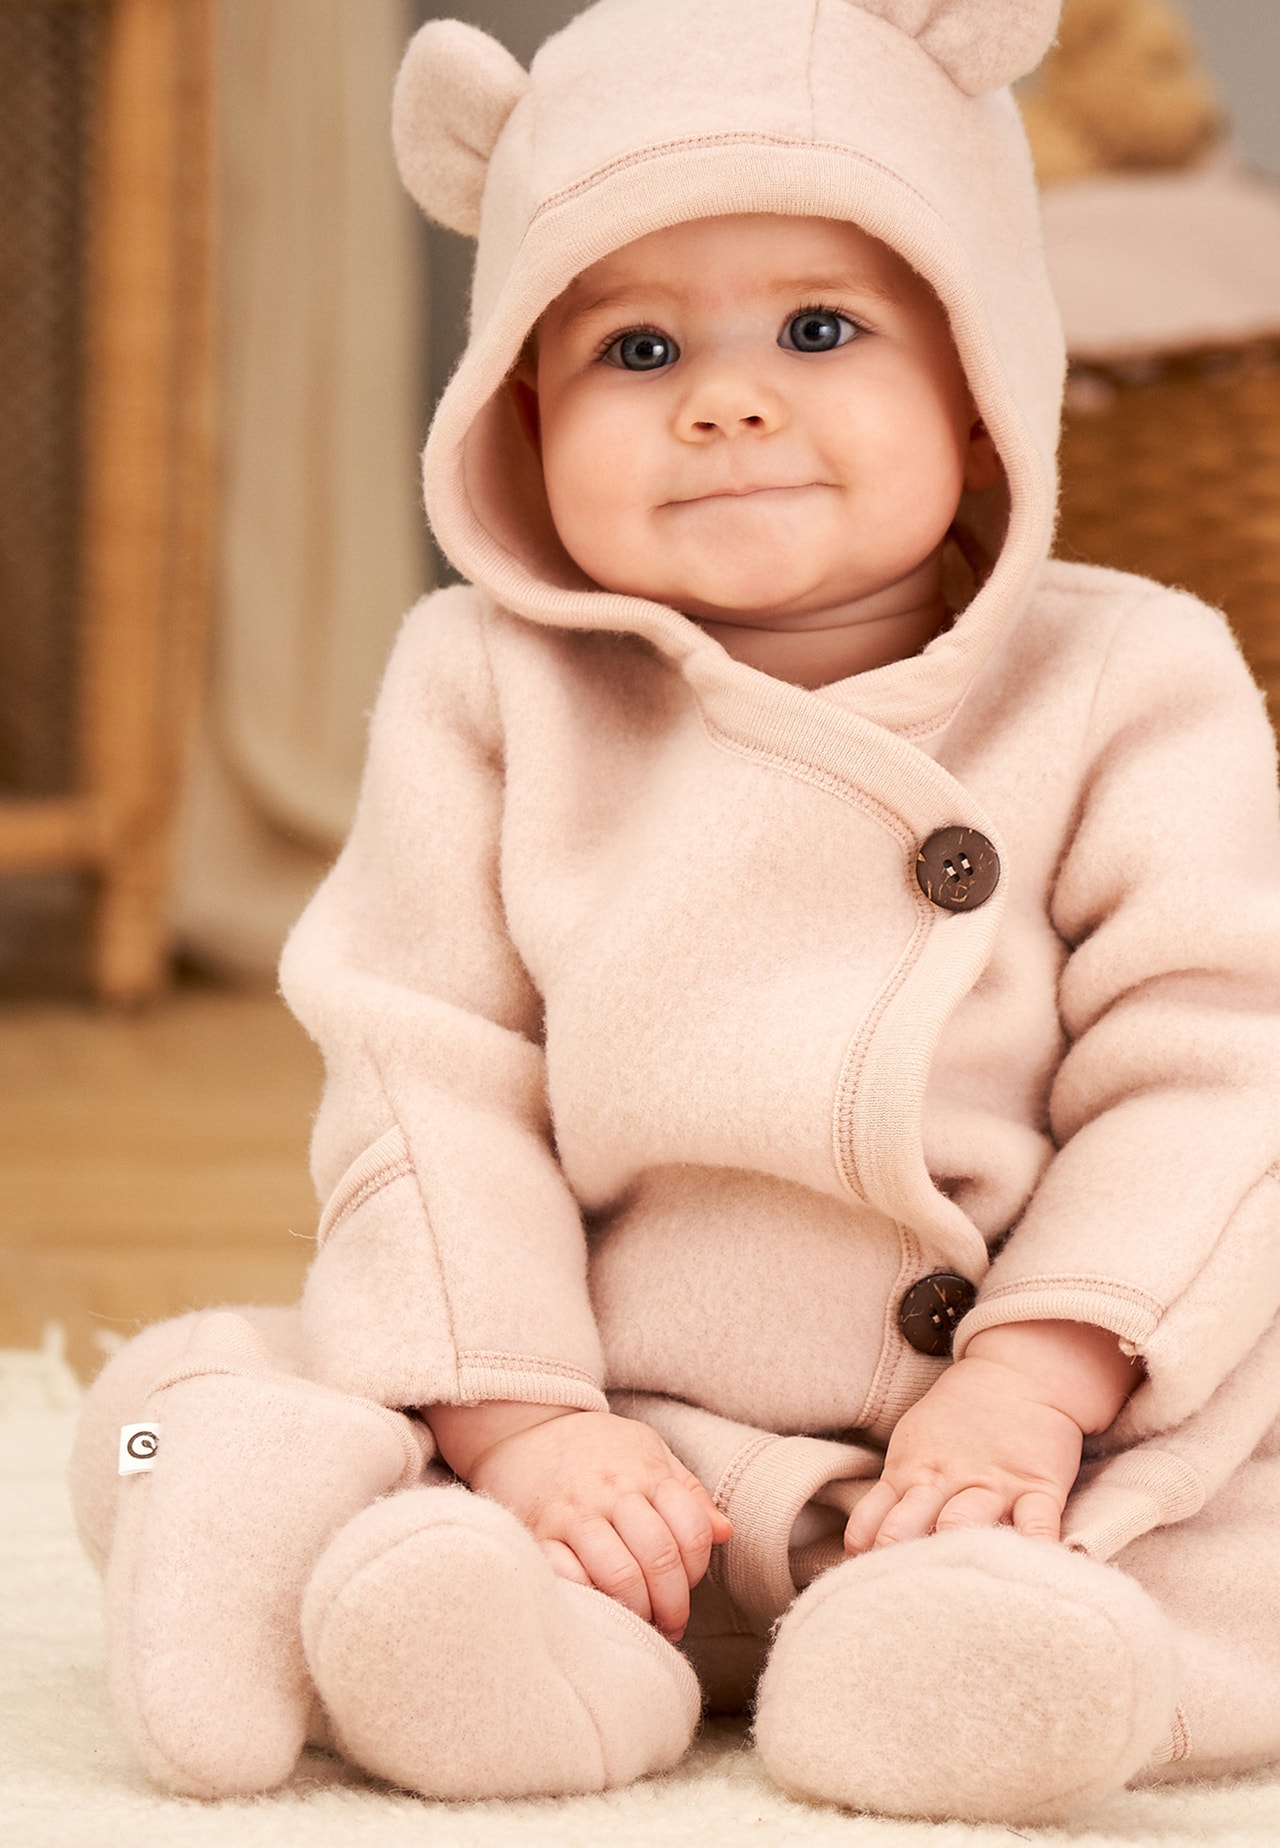 MAMA.LICIOUS Wolle baby-fleece overall -Spa Rose - 1584057600